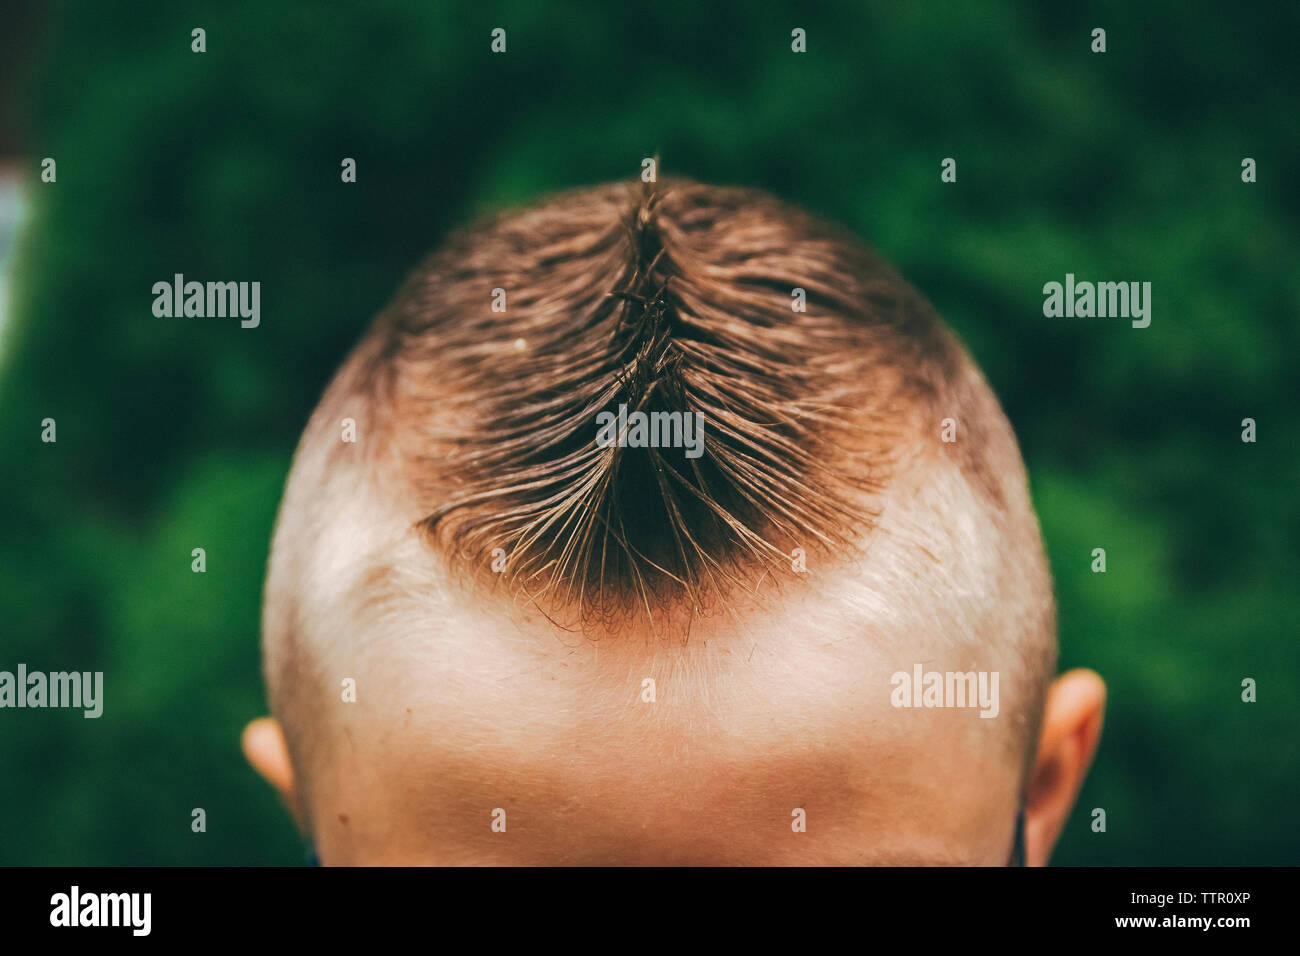 High angle view of boy with spiky hair Stock Photo